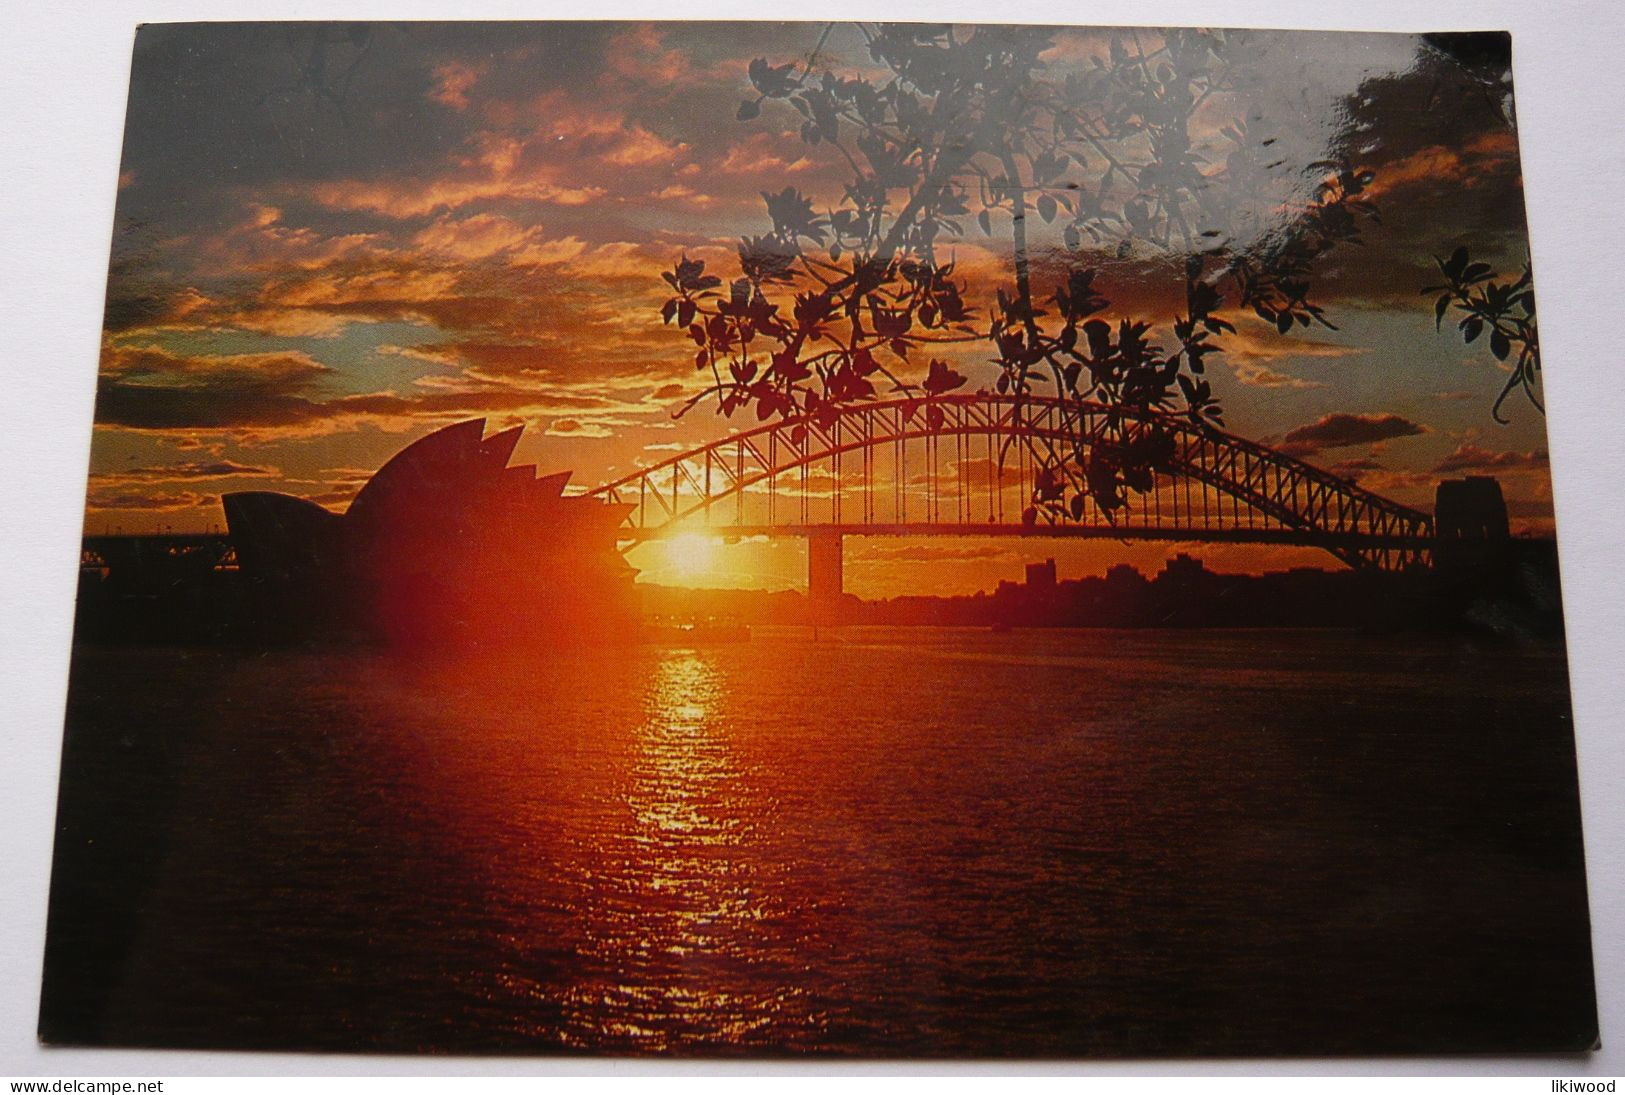 Sydney Opera House And Harbour Bridge, Silhouetted Against The Sunset - Sydney